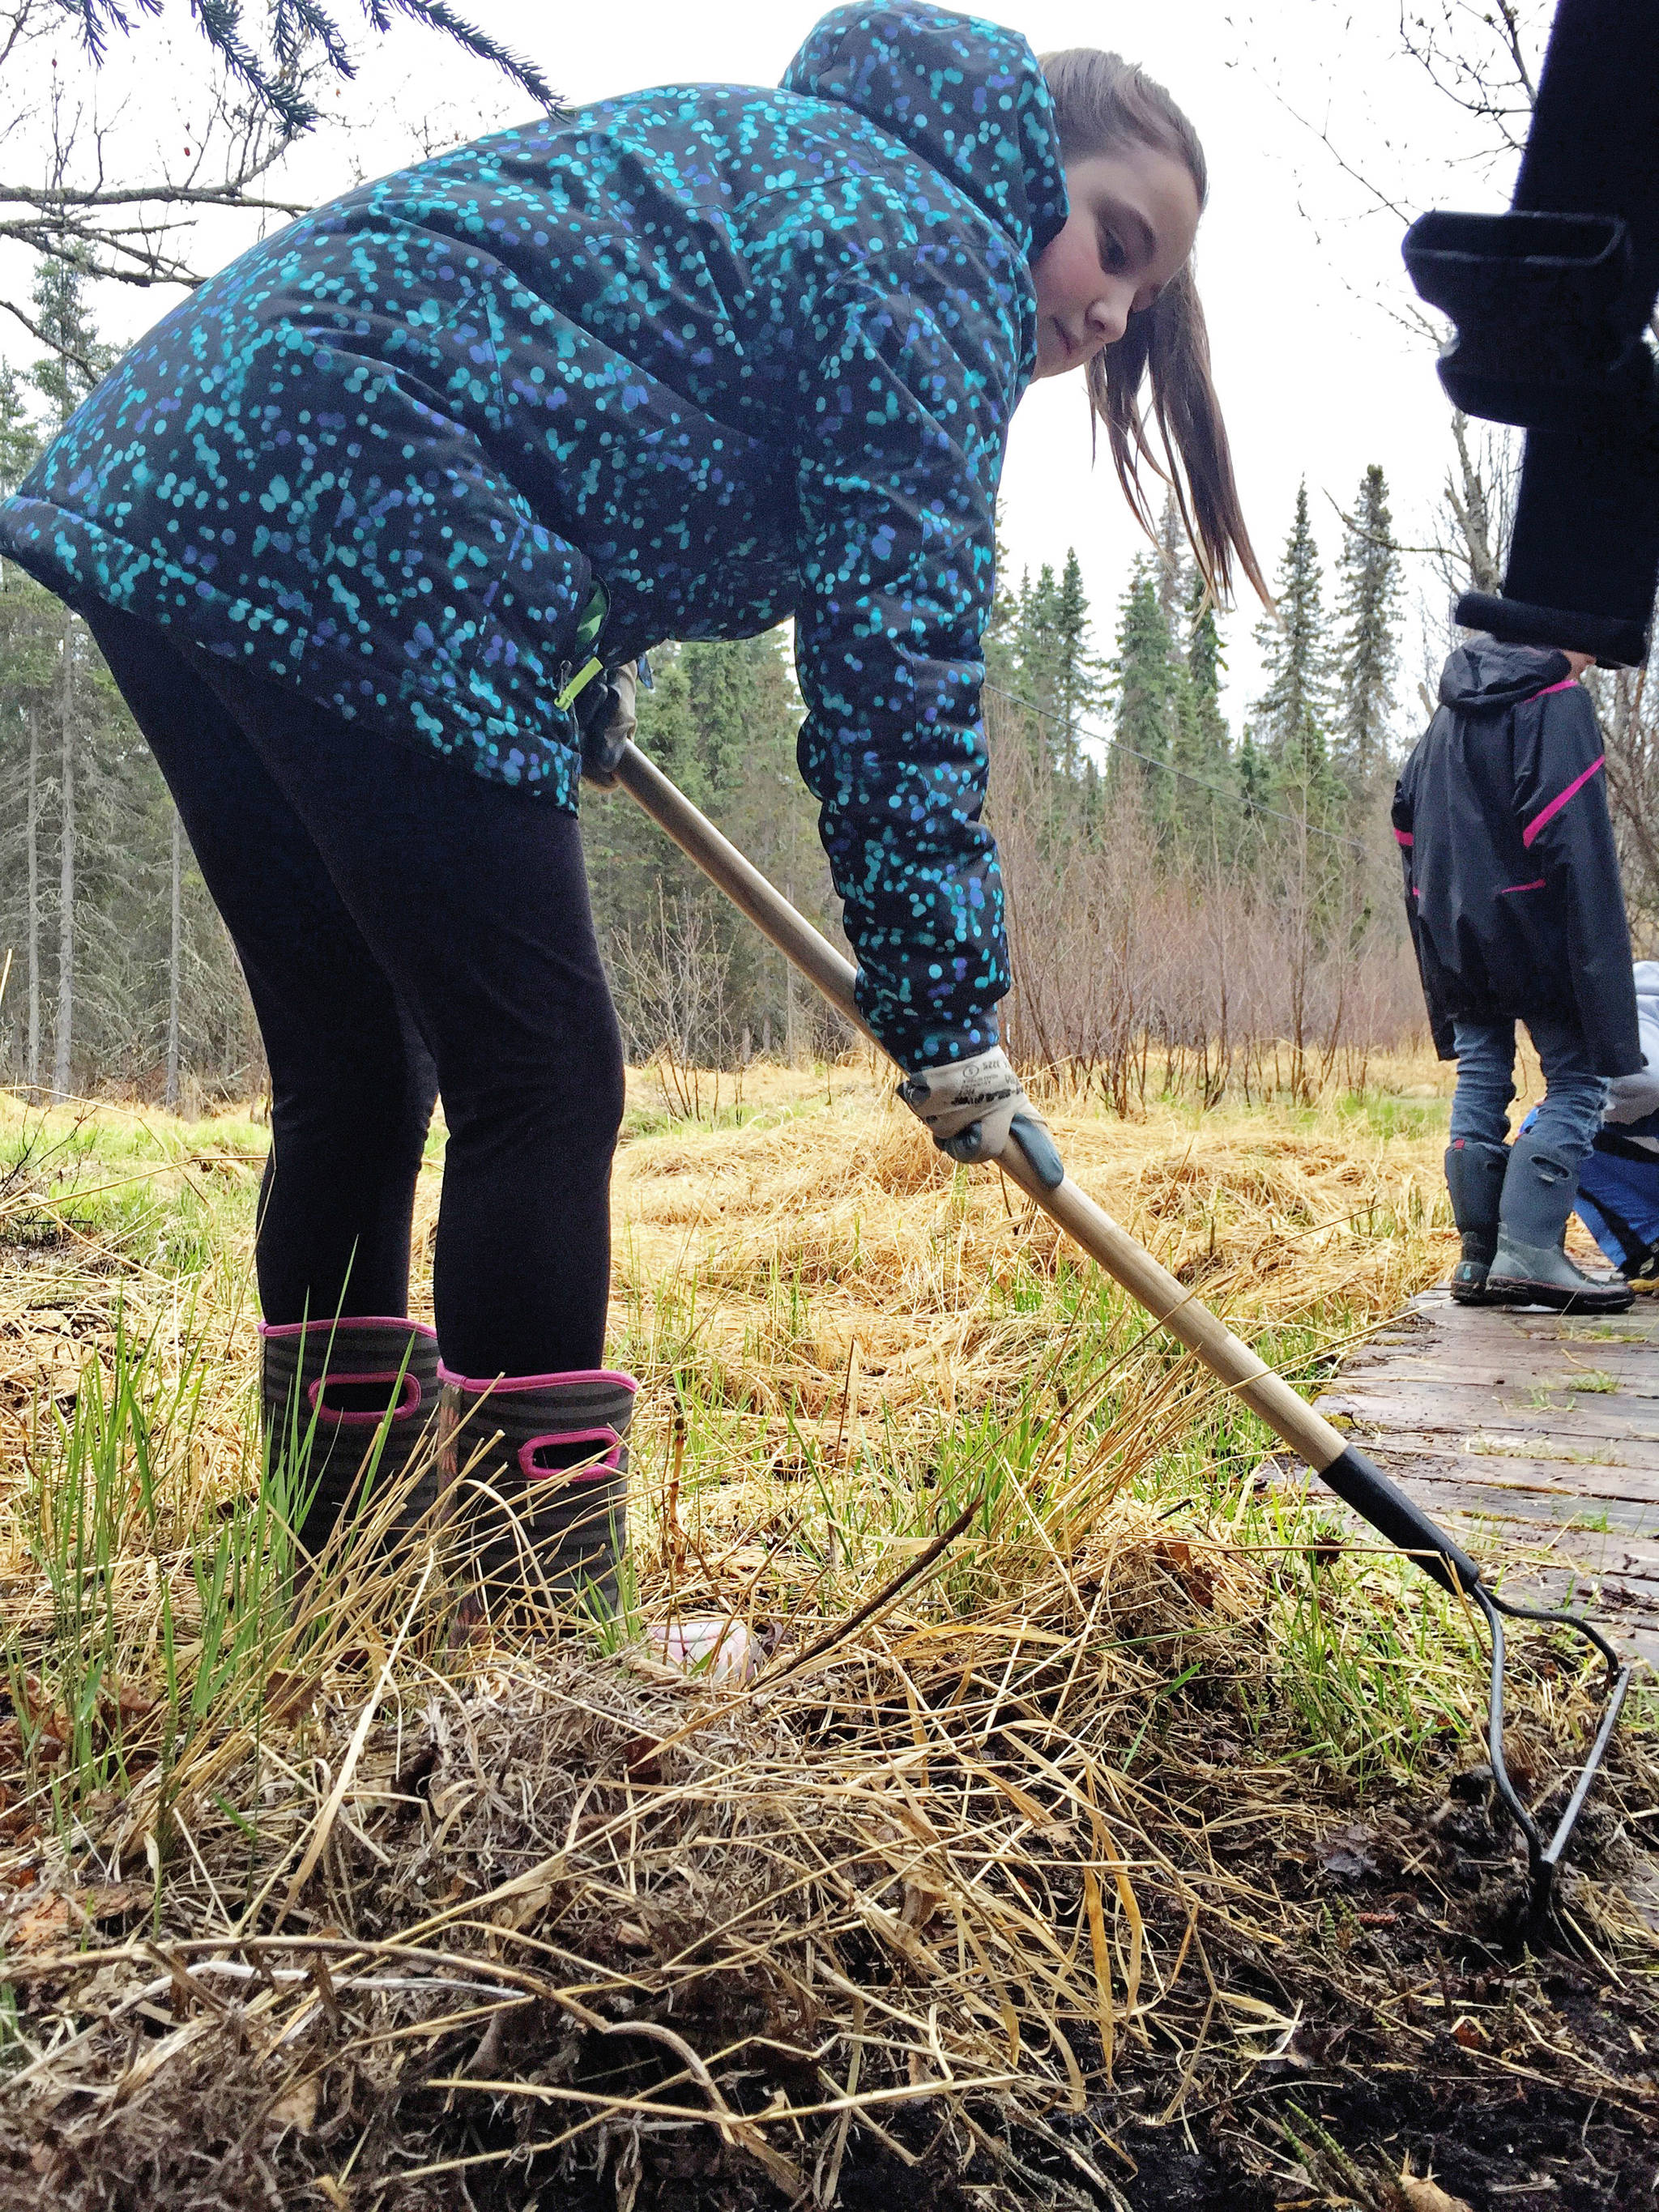 Kalifornsky Beach Elementary School fifth grade student Caitlyn Crapps rakes away dead material from a trail near the school on Friday, May 18, 2018 near Soldotna, Alaska. The class worked with the Kenai Watershed Forum this year to improve the trail and place plant identification signs along it. (Photo by Elizabeth Earl/Peninsula Clarion)